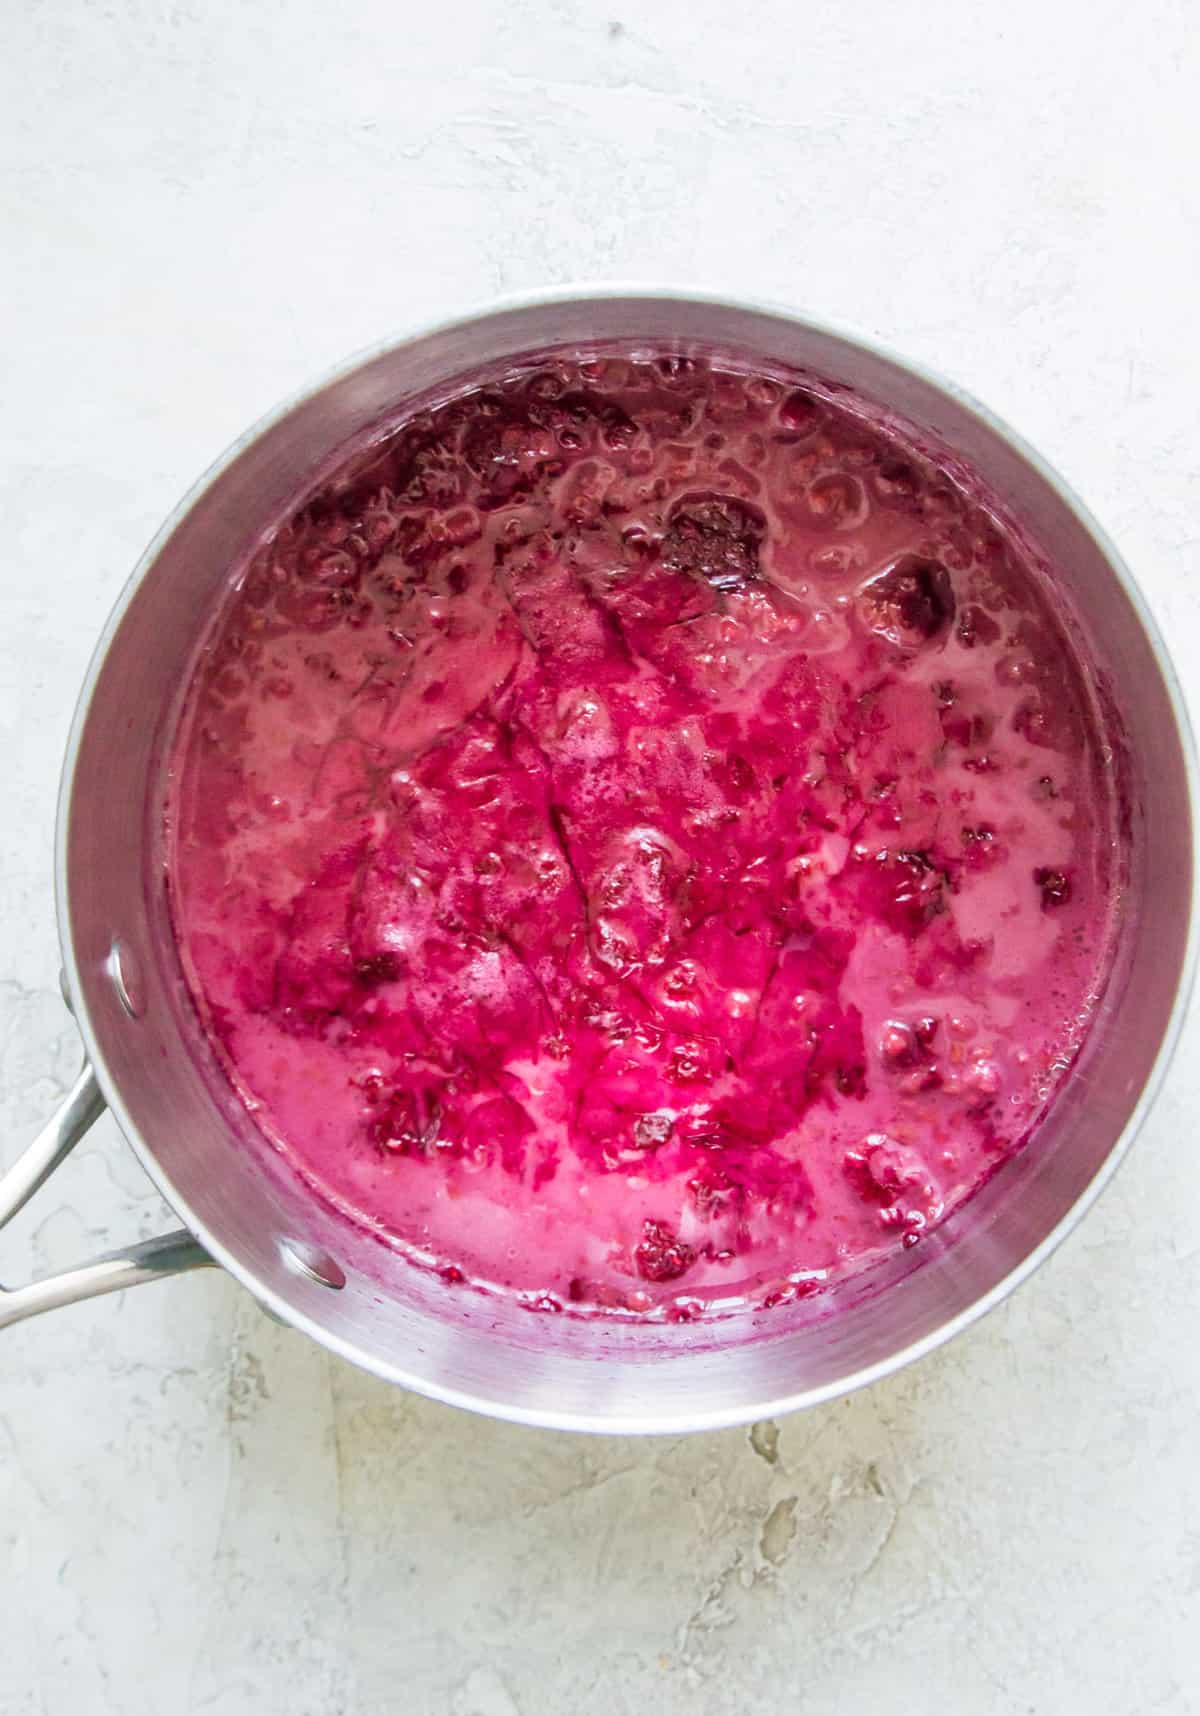 Coconut milk and raspberries that have been simmered together to make a thick, pink sauce in a pot.